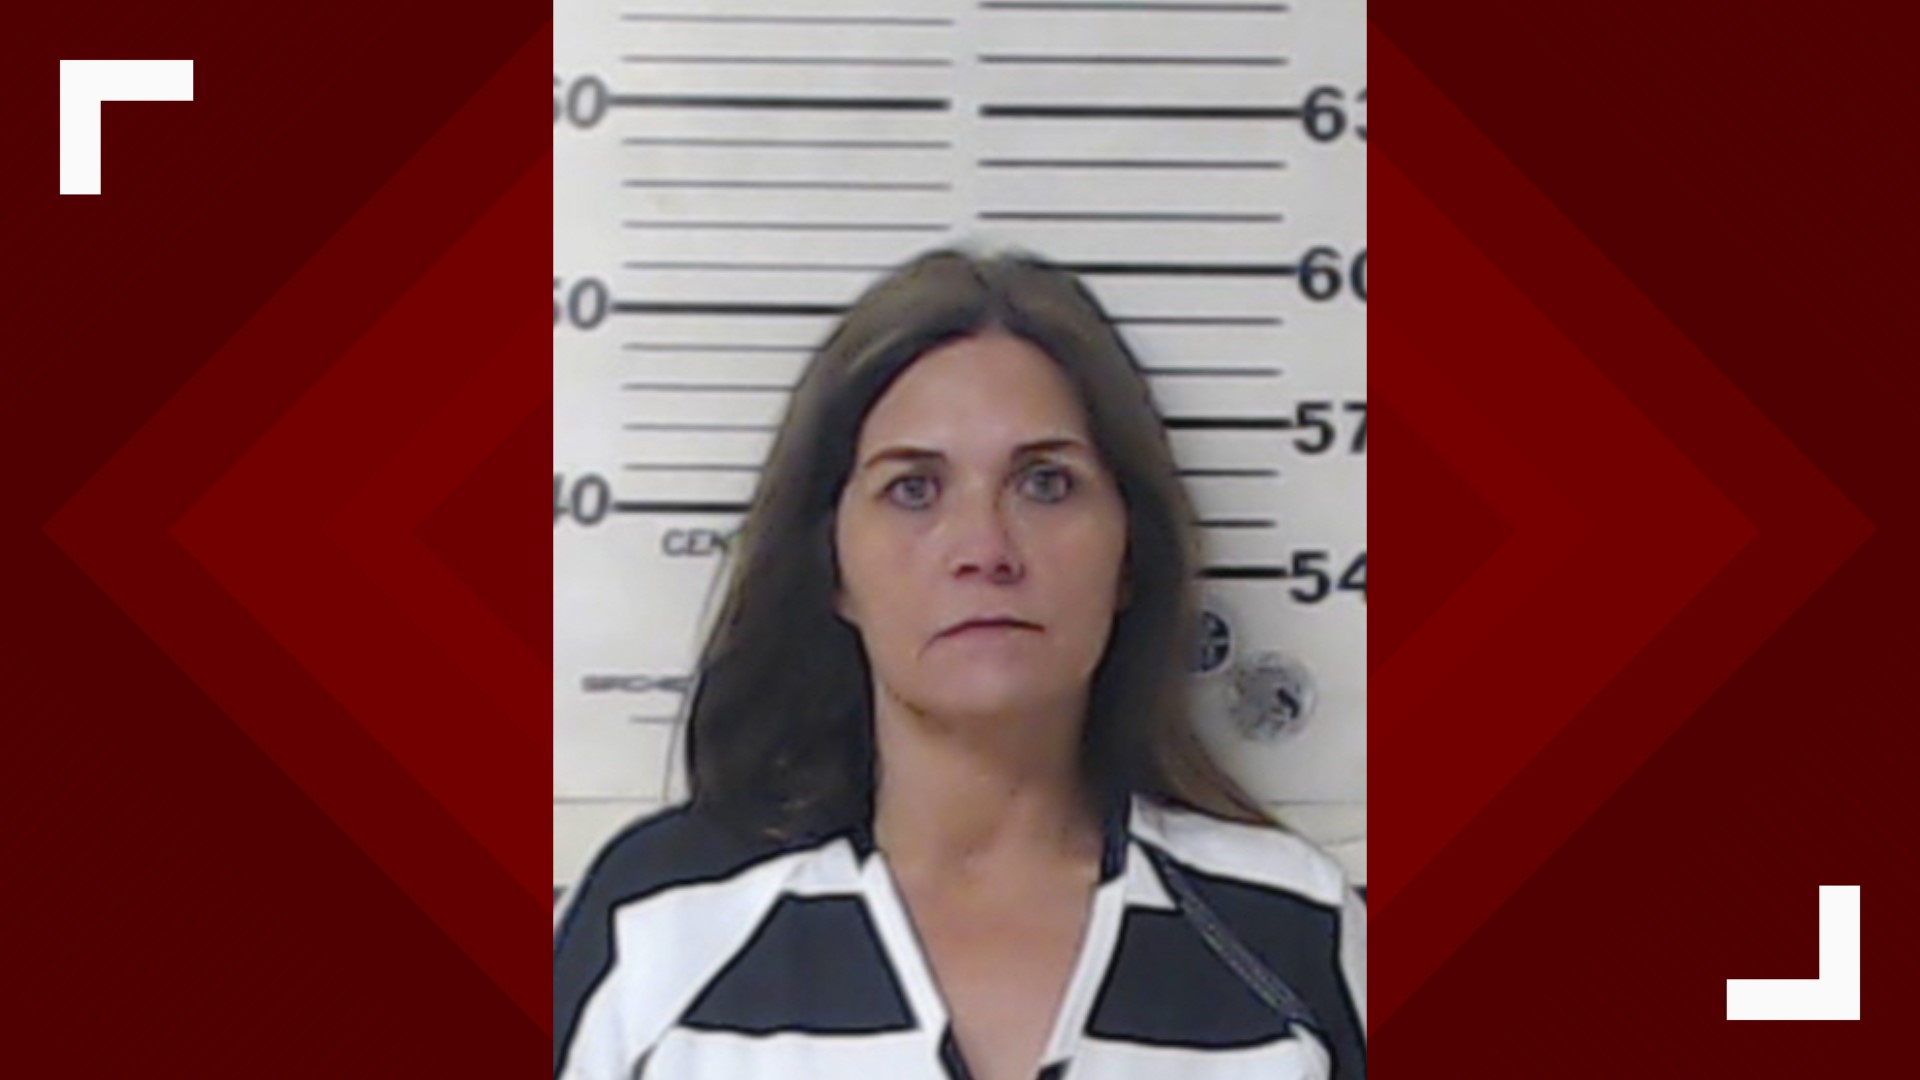 Henderson Co Justice of the Peace clerk arrested during theft